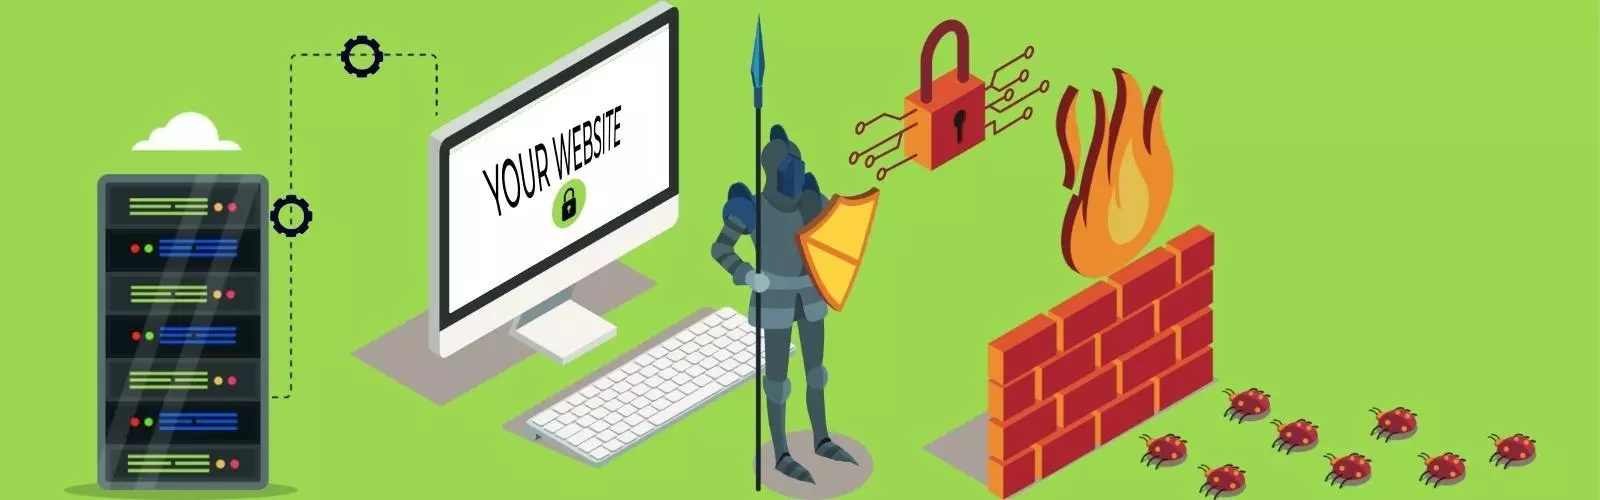 Web Security Domain Name Purchase With Domain ID Protection SEO Webhosting